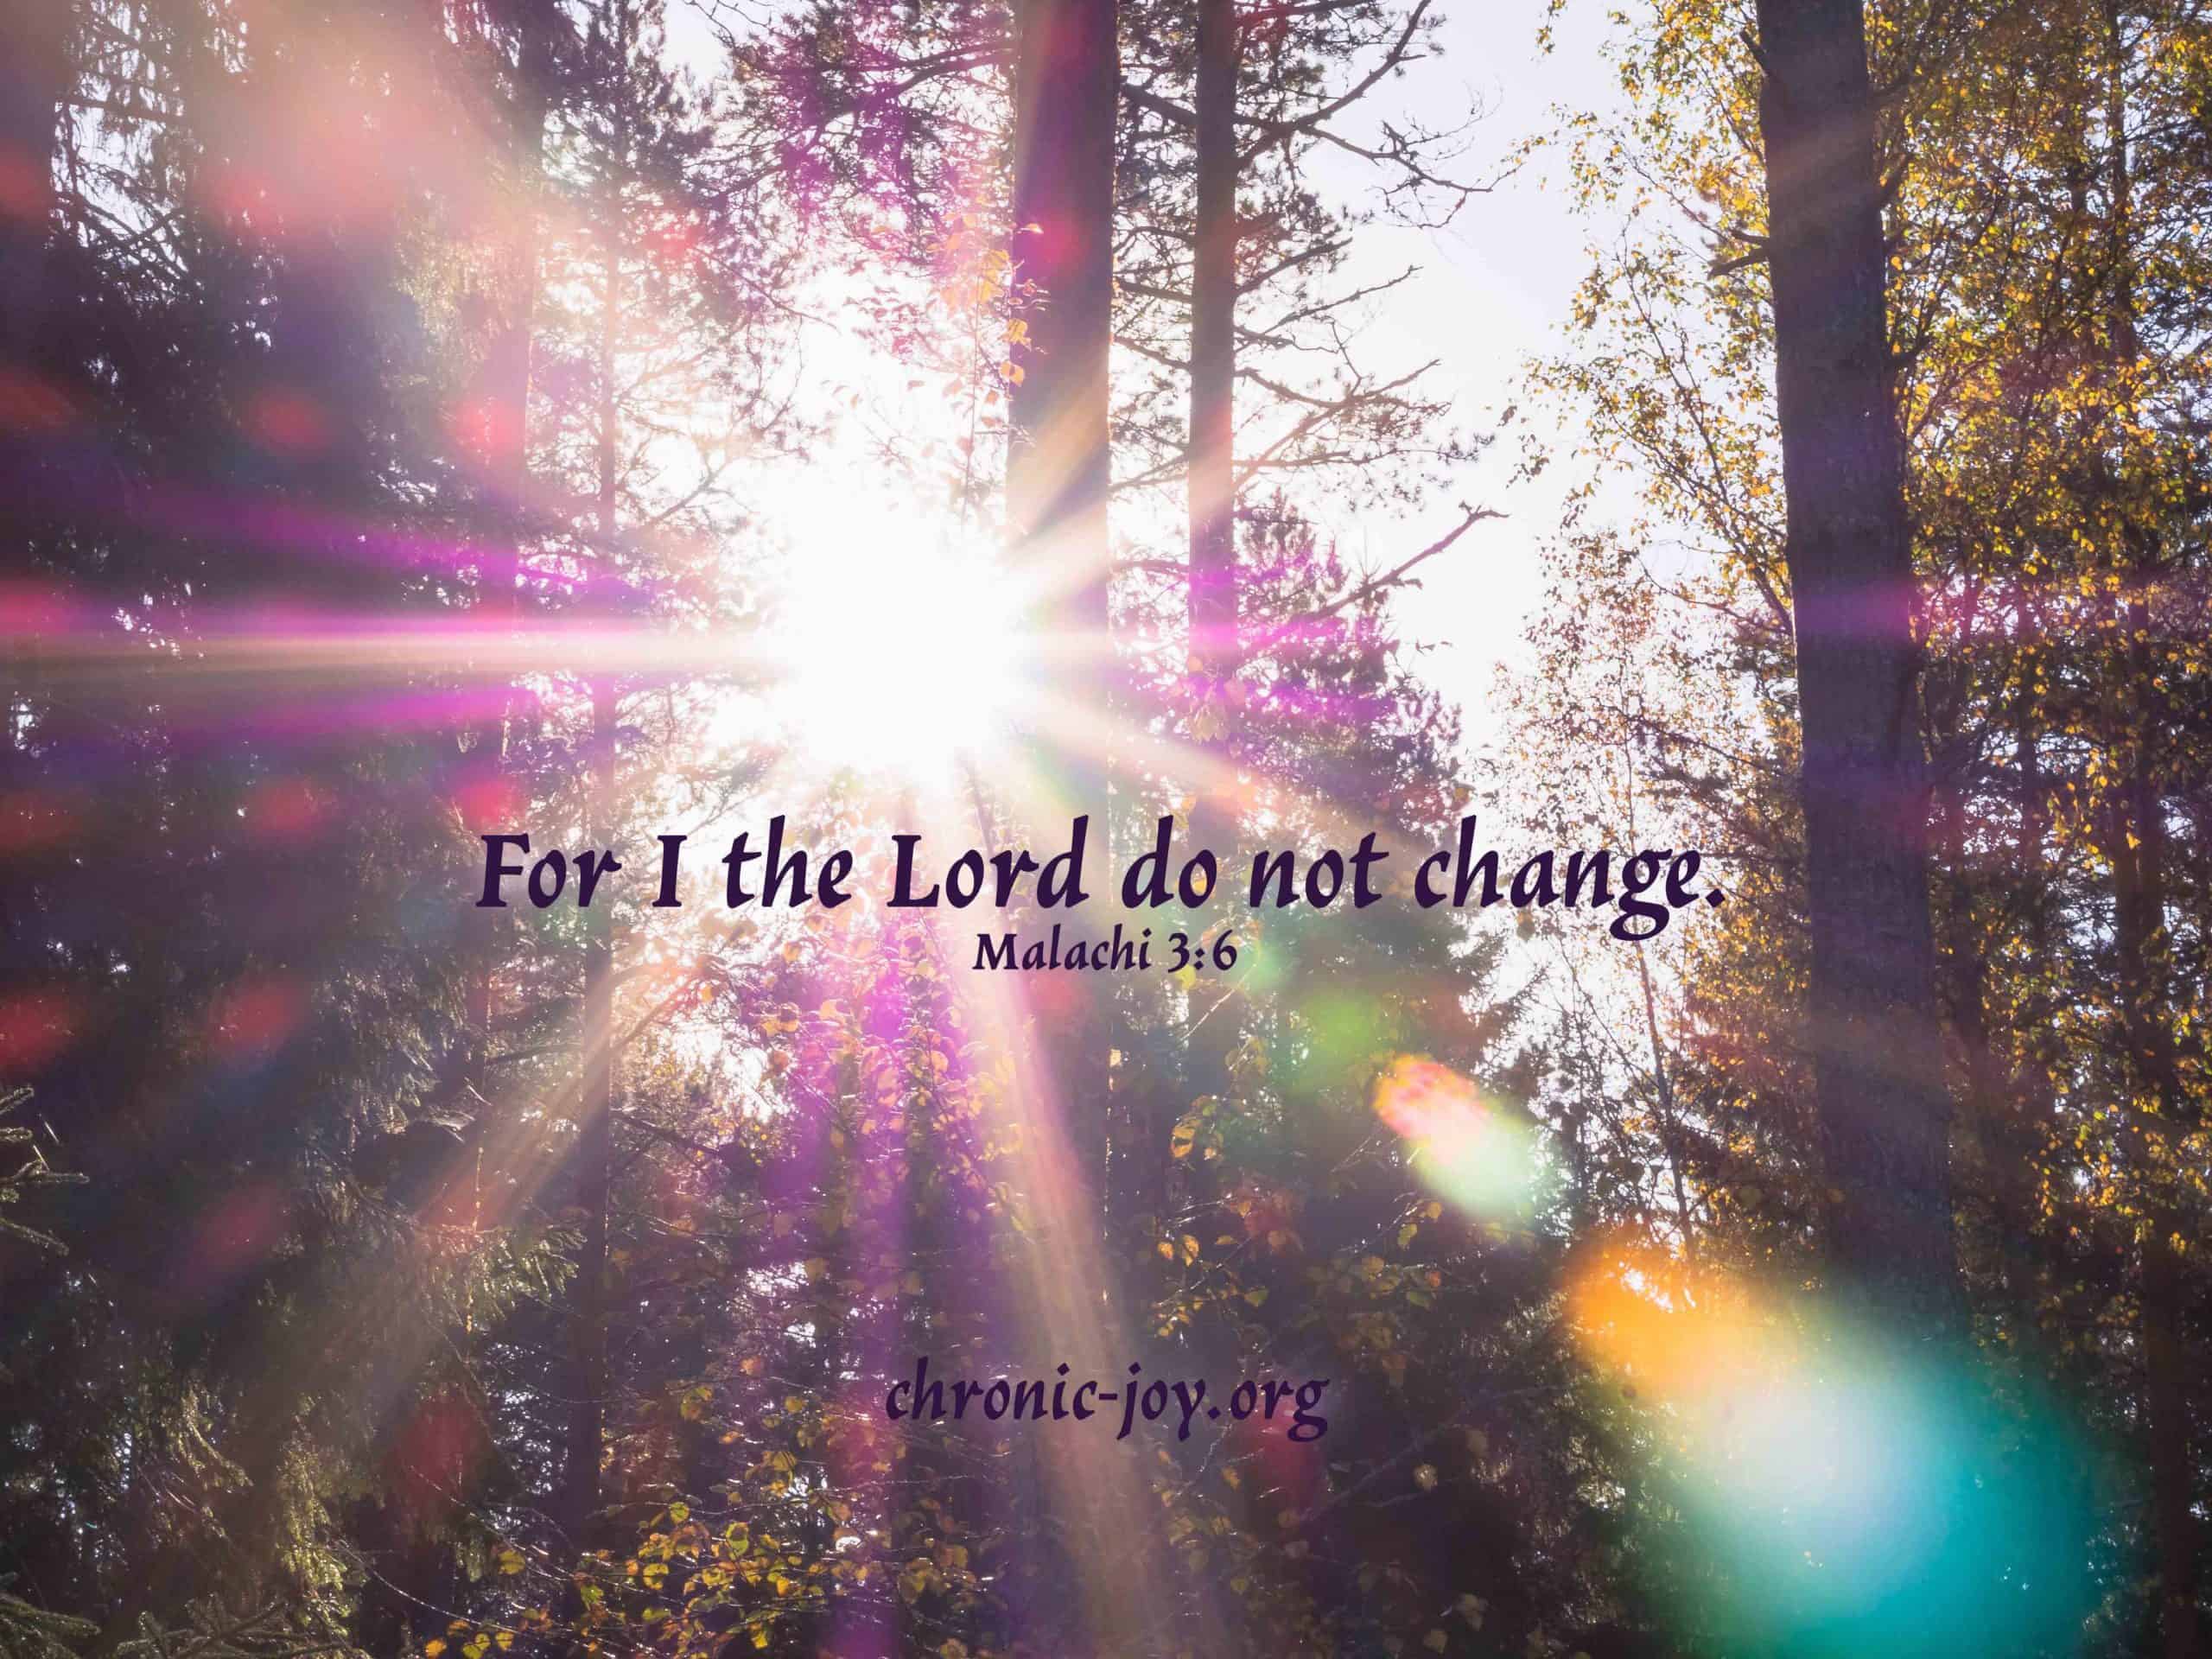 For I the Lord do not change. (Malachi 3:6)